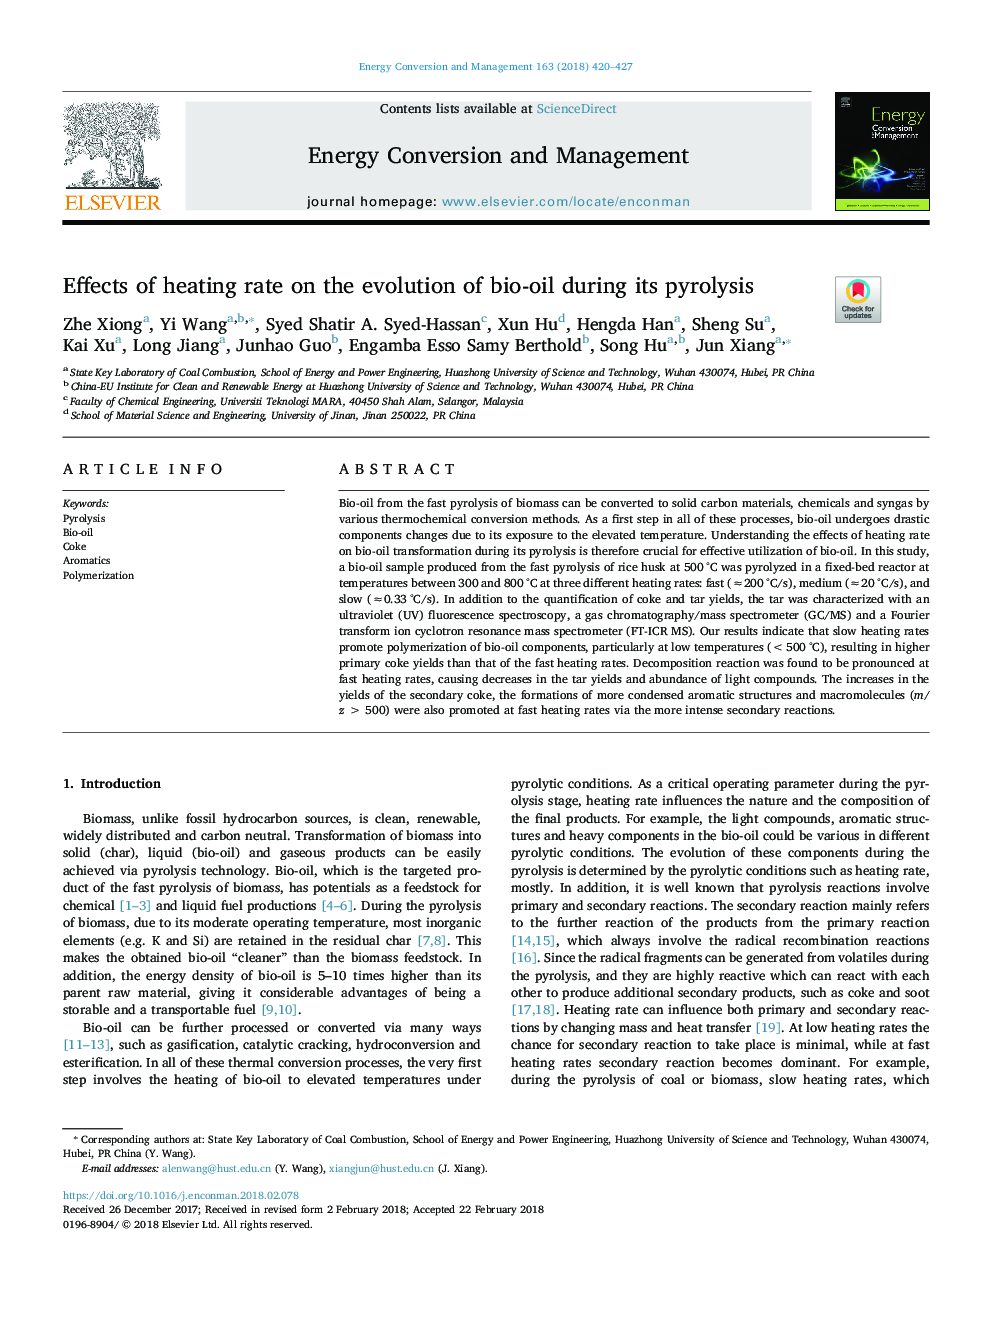 Effects of heating rate on the evolution of bio-oil during its pyrolysis